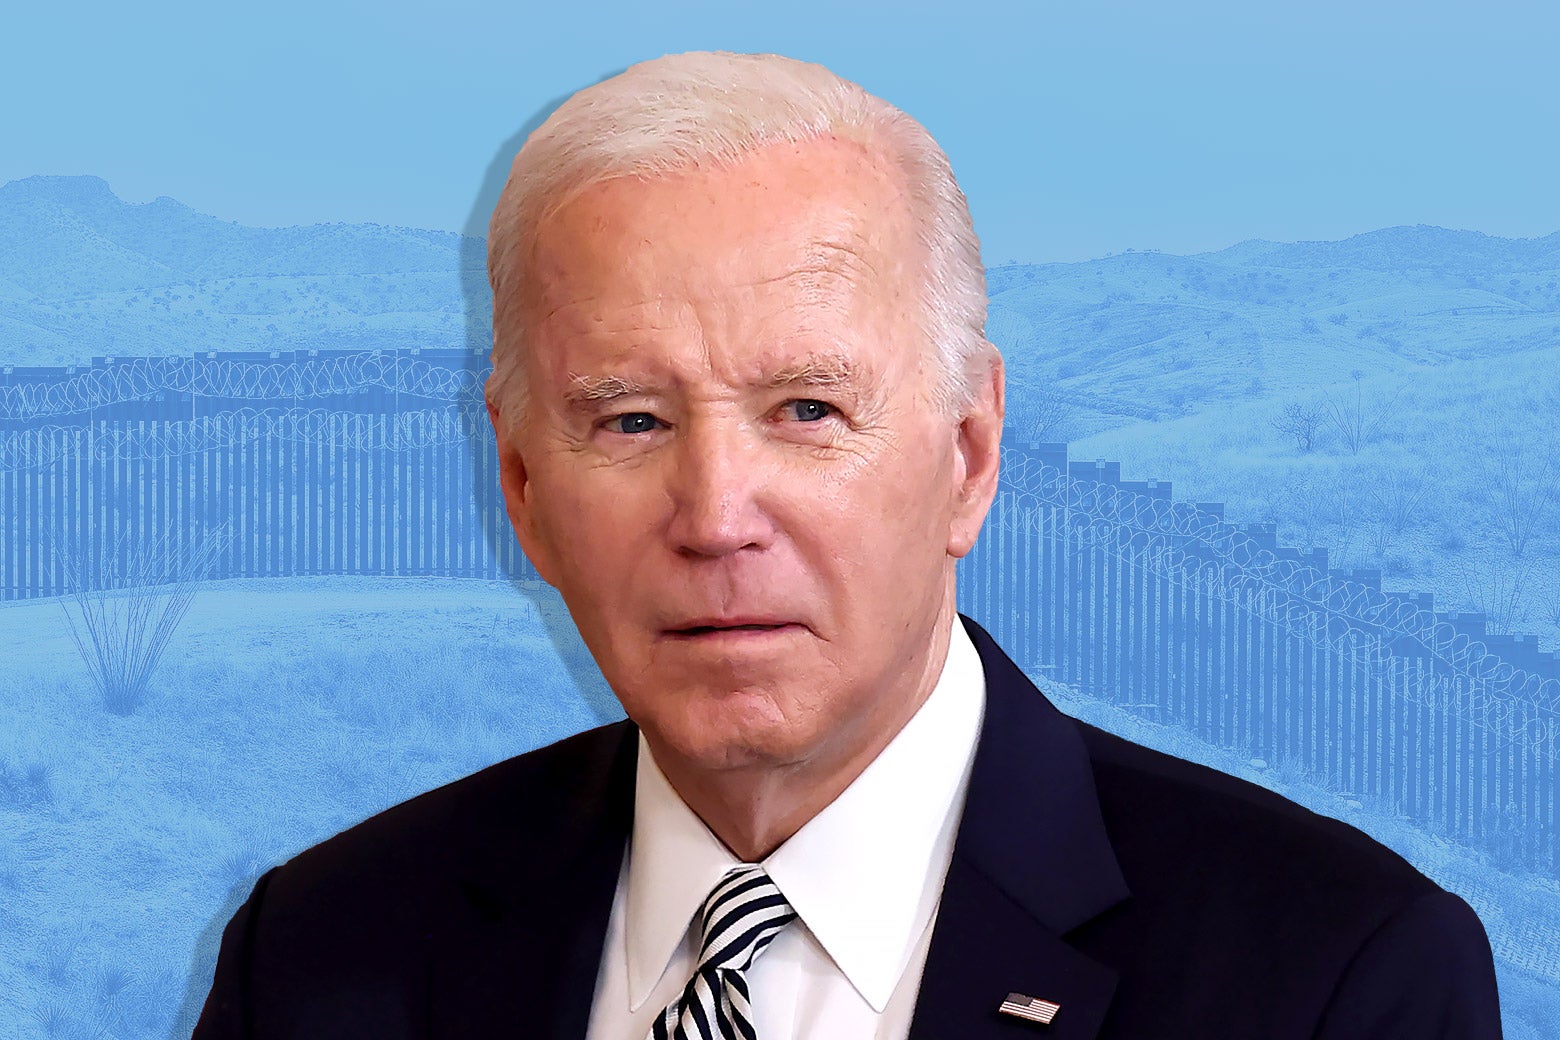 So Many People Want Biden to “Shut Down” the Border to Stop Migration. There’s Just One Problem With This! Ben Mathis-Lilley